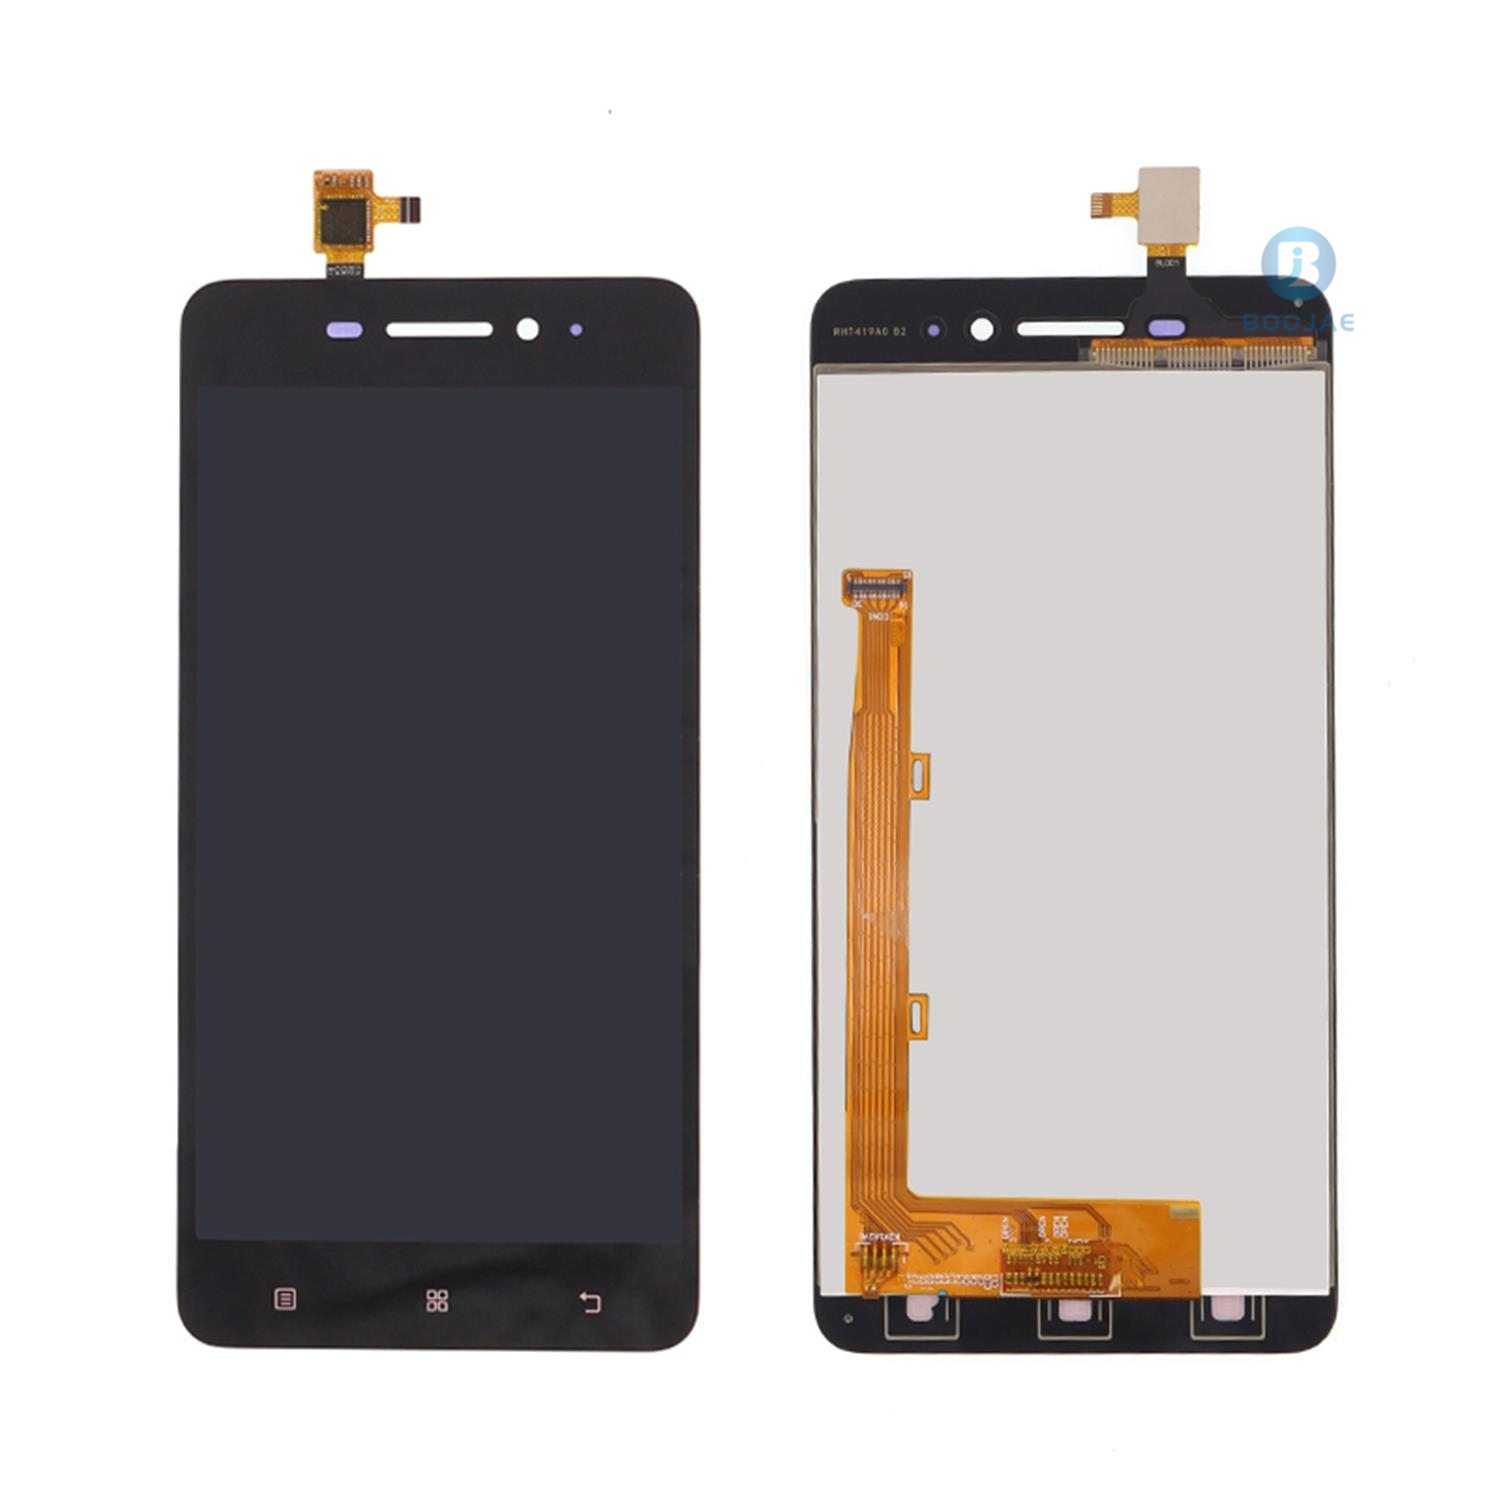 For Lenovo S60 LCD Screen Display and Touch Panel Digitizer Assembly Replacement